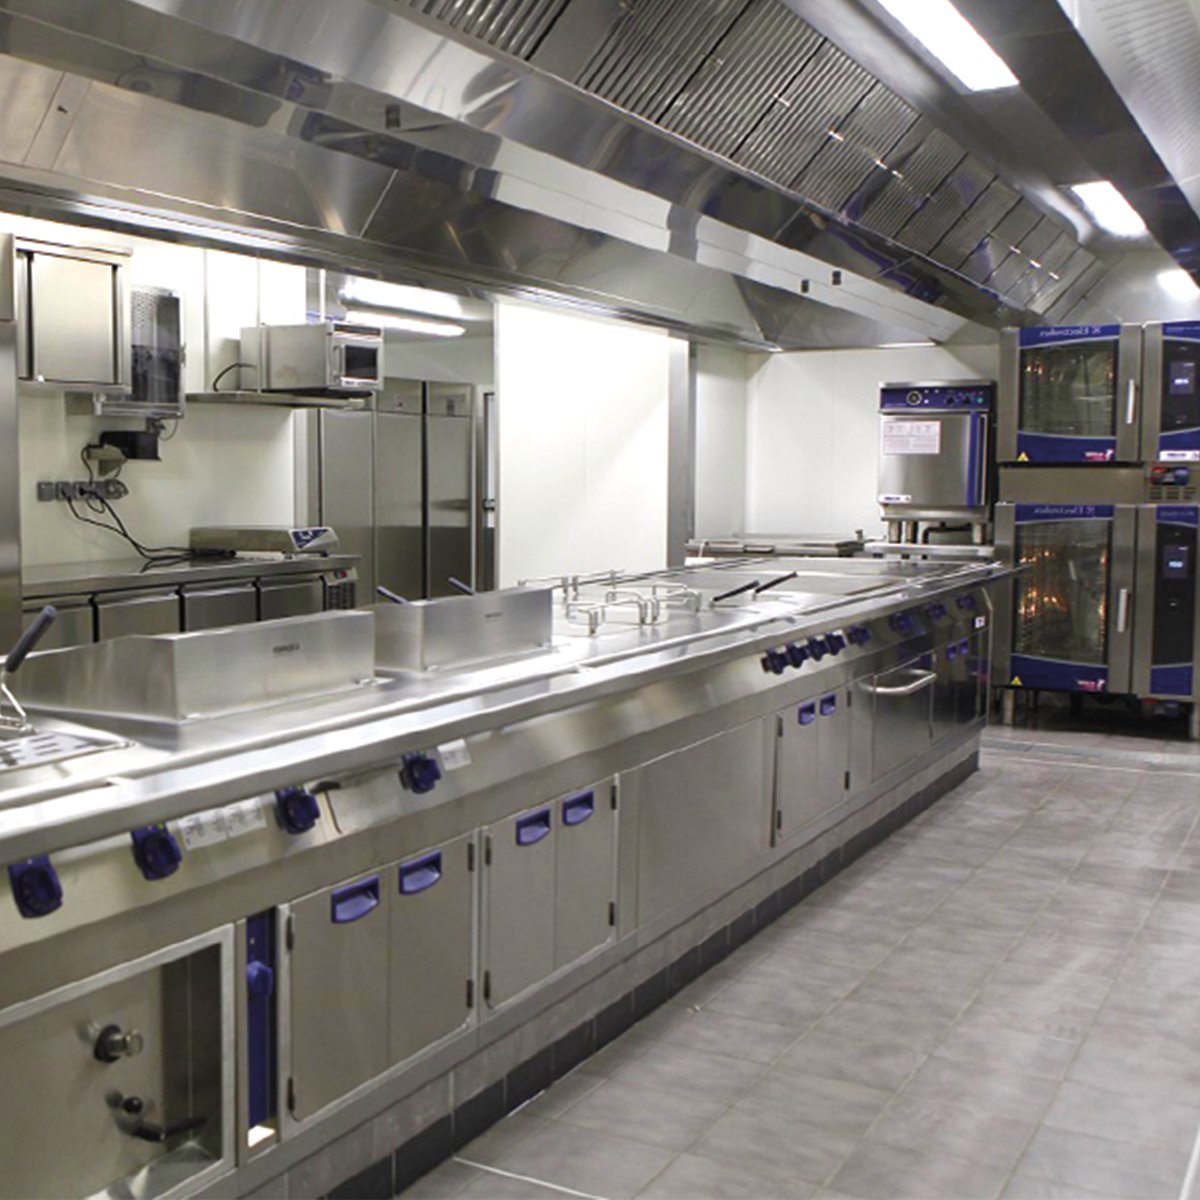 Catering and kitchen equipment